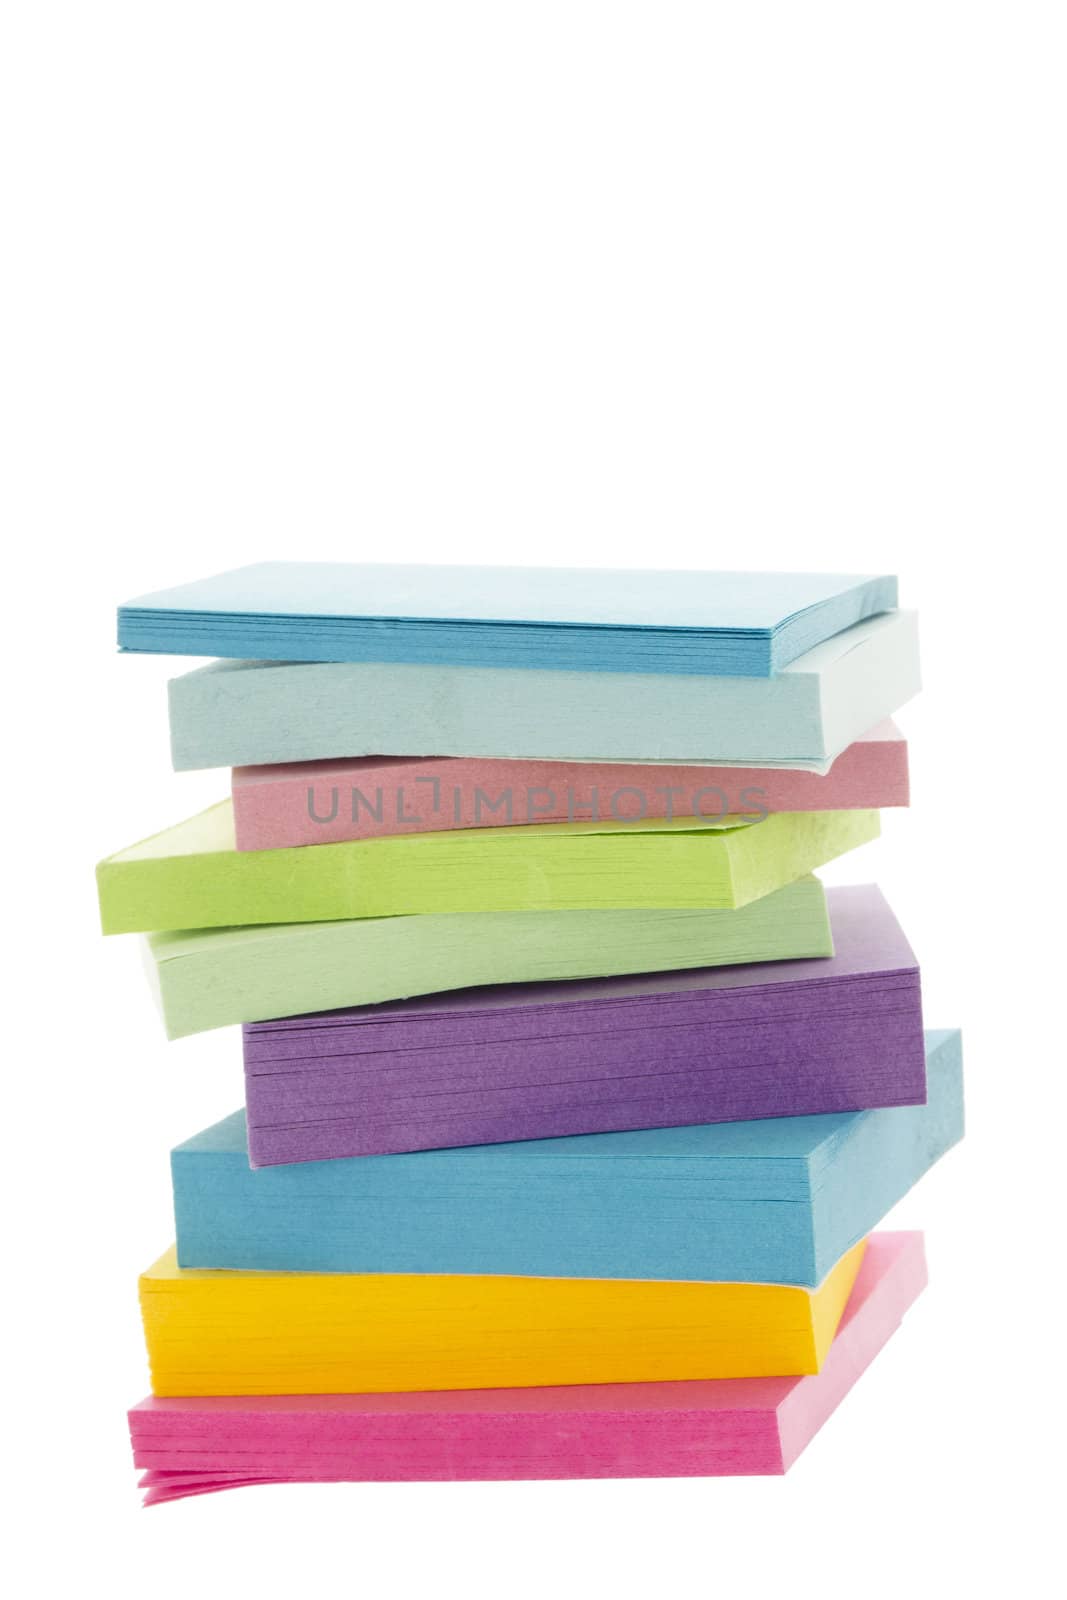 A pile of colorful adhesive paper isolated over the white background